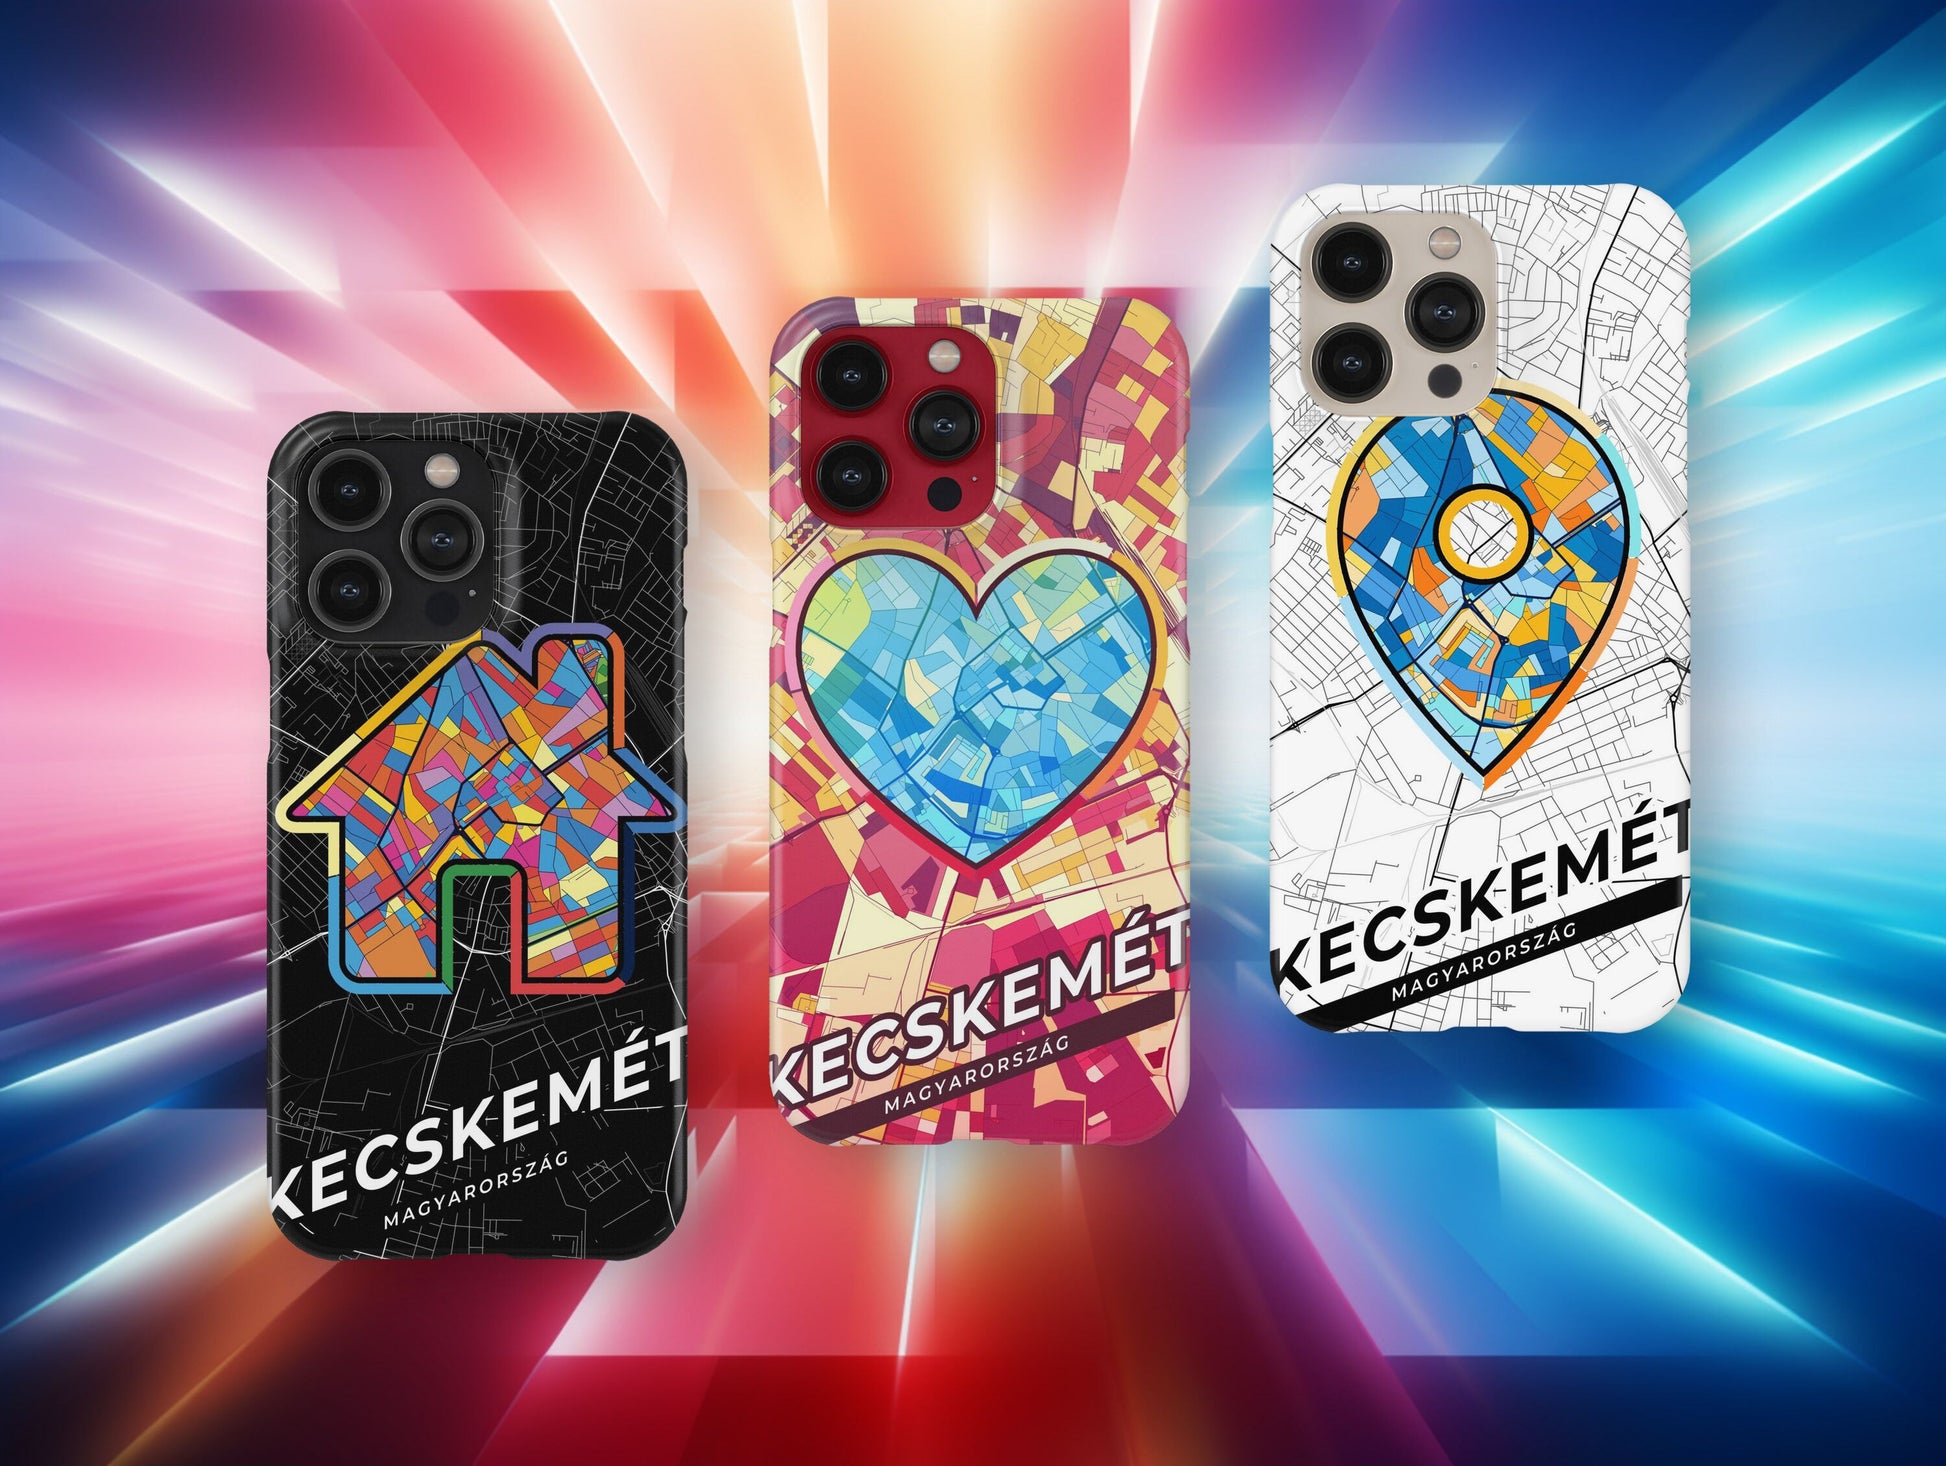 Kecskemét Hungary slim phone case with colorful icon. Birthday, wedding or housewarming gift. Couple match cases.